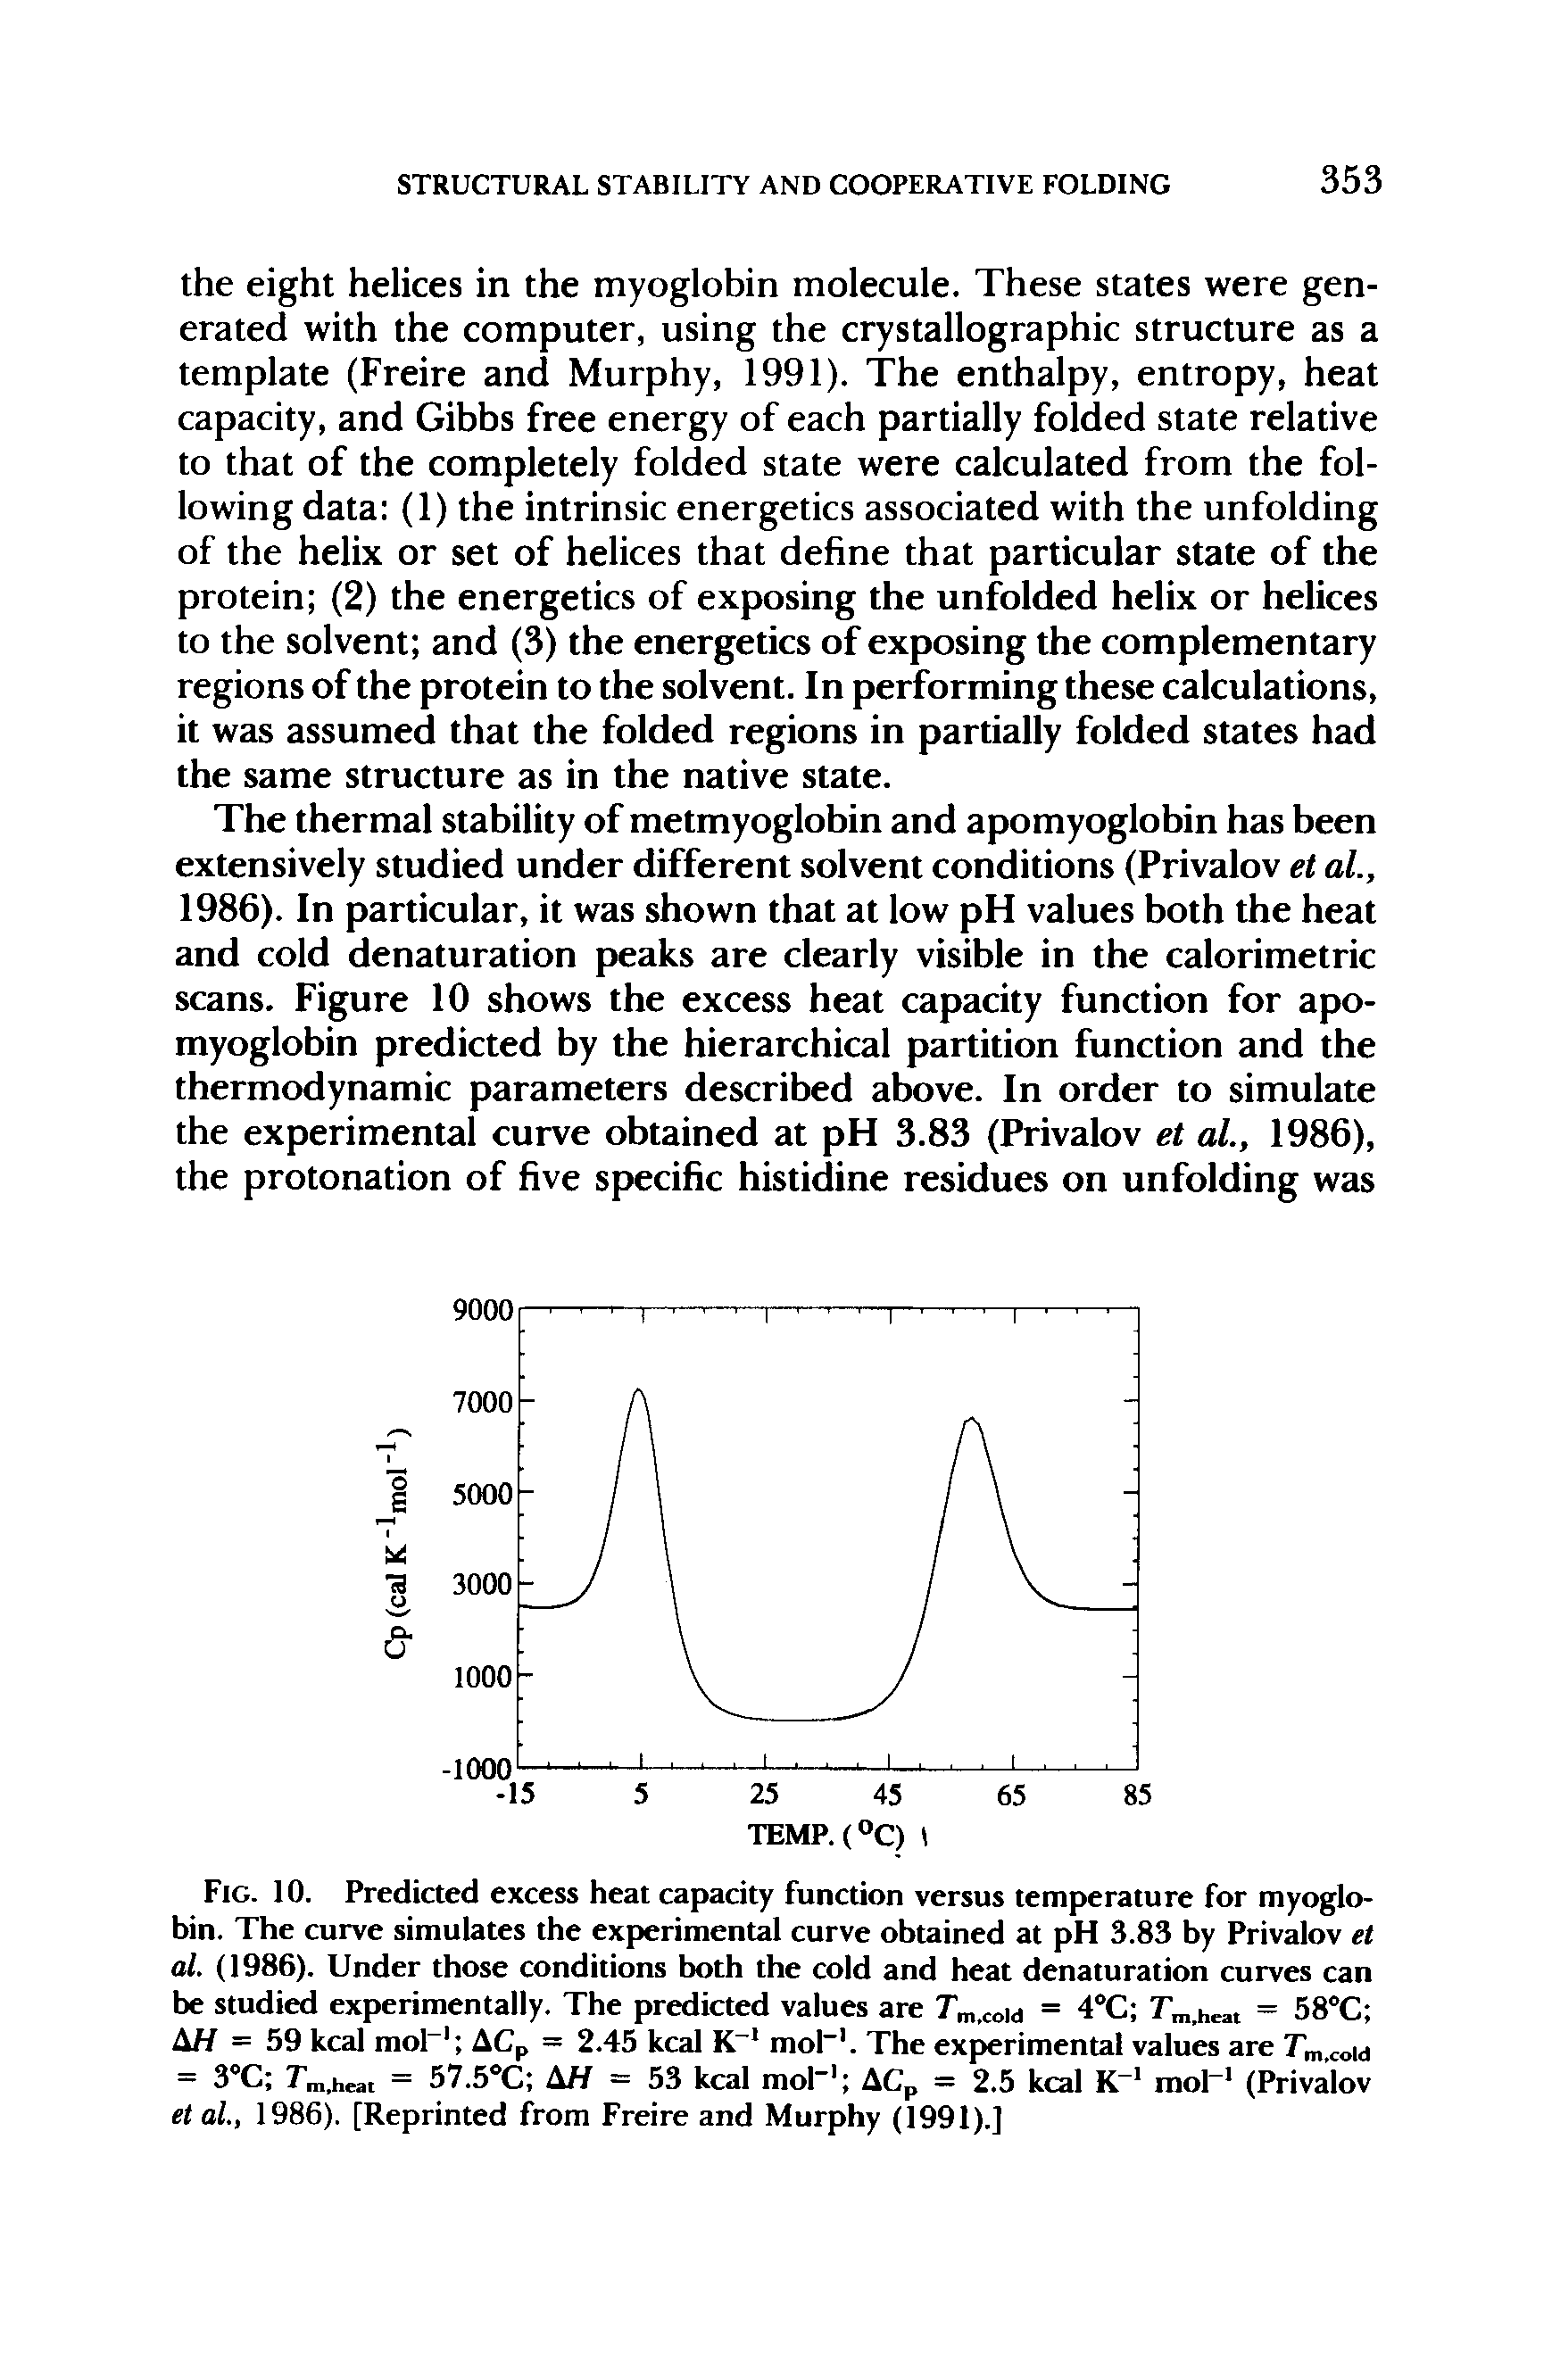 Fig. 10. Predicted excess heat capacity function versus temperature for myoglobin. The curve simulates the experimental curve obtained at pH 3.83 by Privalov et al. (1986). Under those conditions both the cold and heat denaturation curves can be studied experimentally. The predicted values are Tm,cold = 4°C Tm>heat = 58°C A// = 59 kcal mol-1 ACp = 2.45 kcal K-1 mol-1. The experimental values are Tm>coid = 3°C Tm>heat = 57.5°C AH = 53 kcal mol-1 ACP = 2.5 kcal K-1 mol-1 (Privalov et al., 1986). [Reprinted from Freire and Murphy (1991).]...